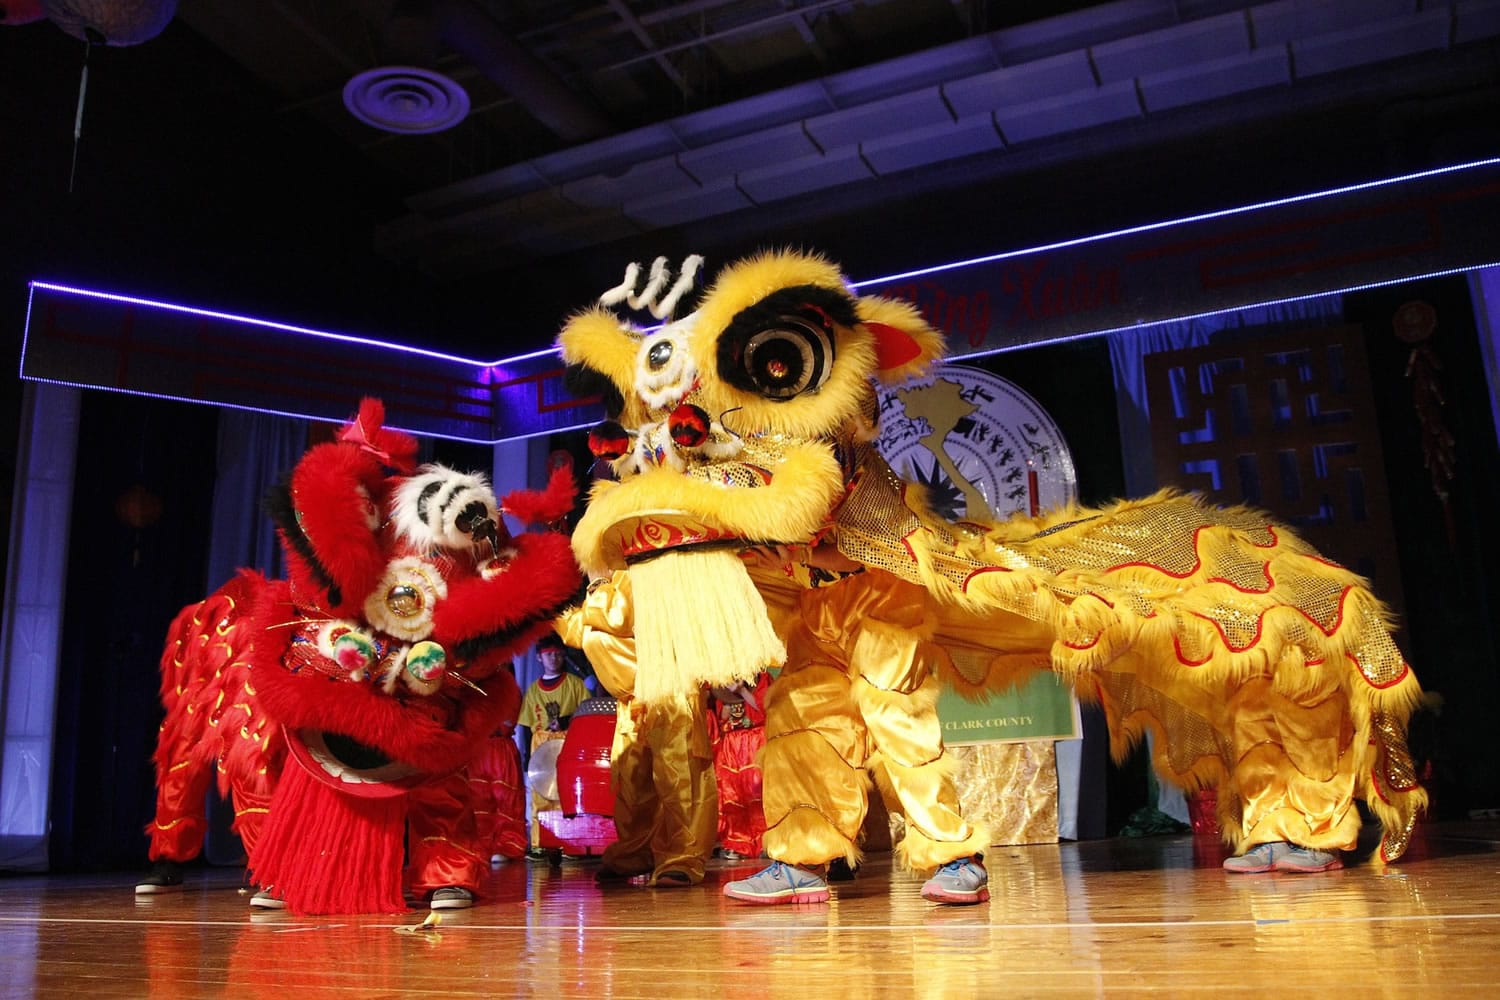 Photos by Steve Dipaola for The Columbian
The Lion Dance kicks off the annual Vietnamese Lunar New Year celebration at Eleanor Roosevelt Elementary School on Saturday.